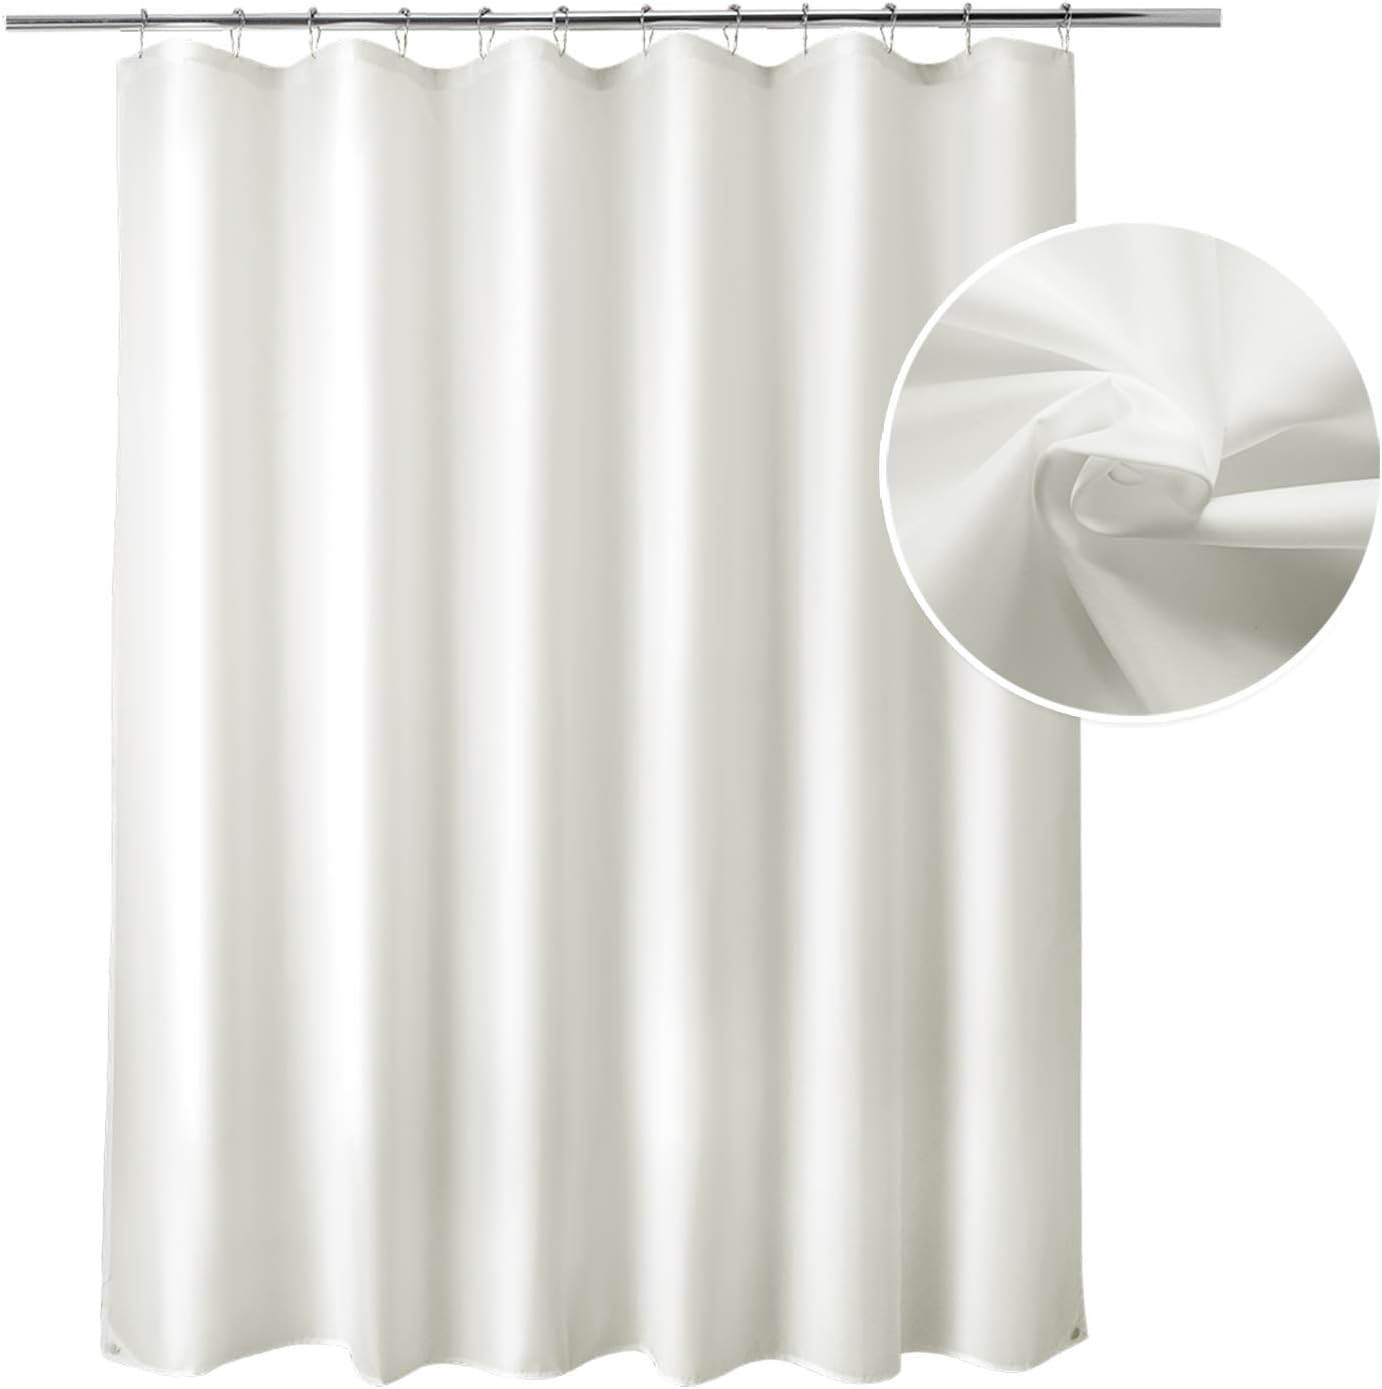 Titanker Shower Curtain Fabric, Do Polyester Shower Curtains Need A Liner